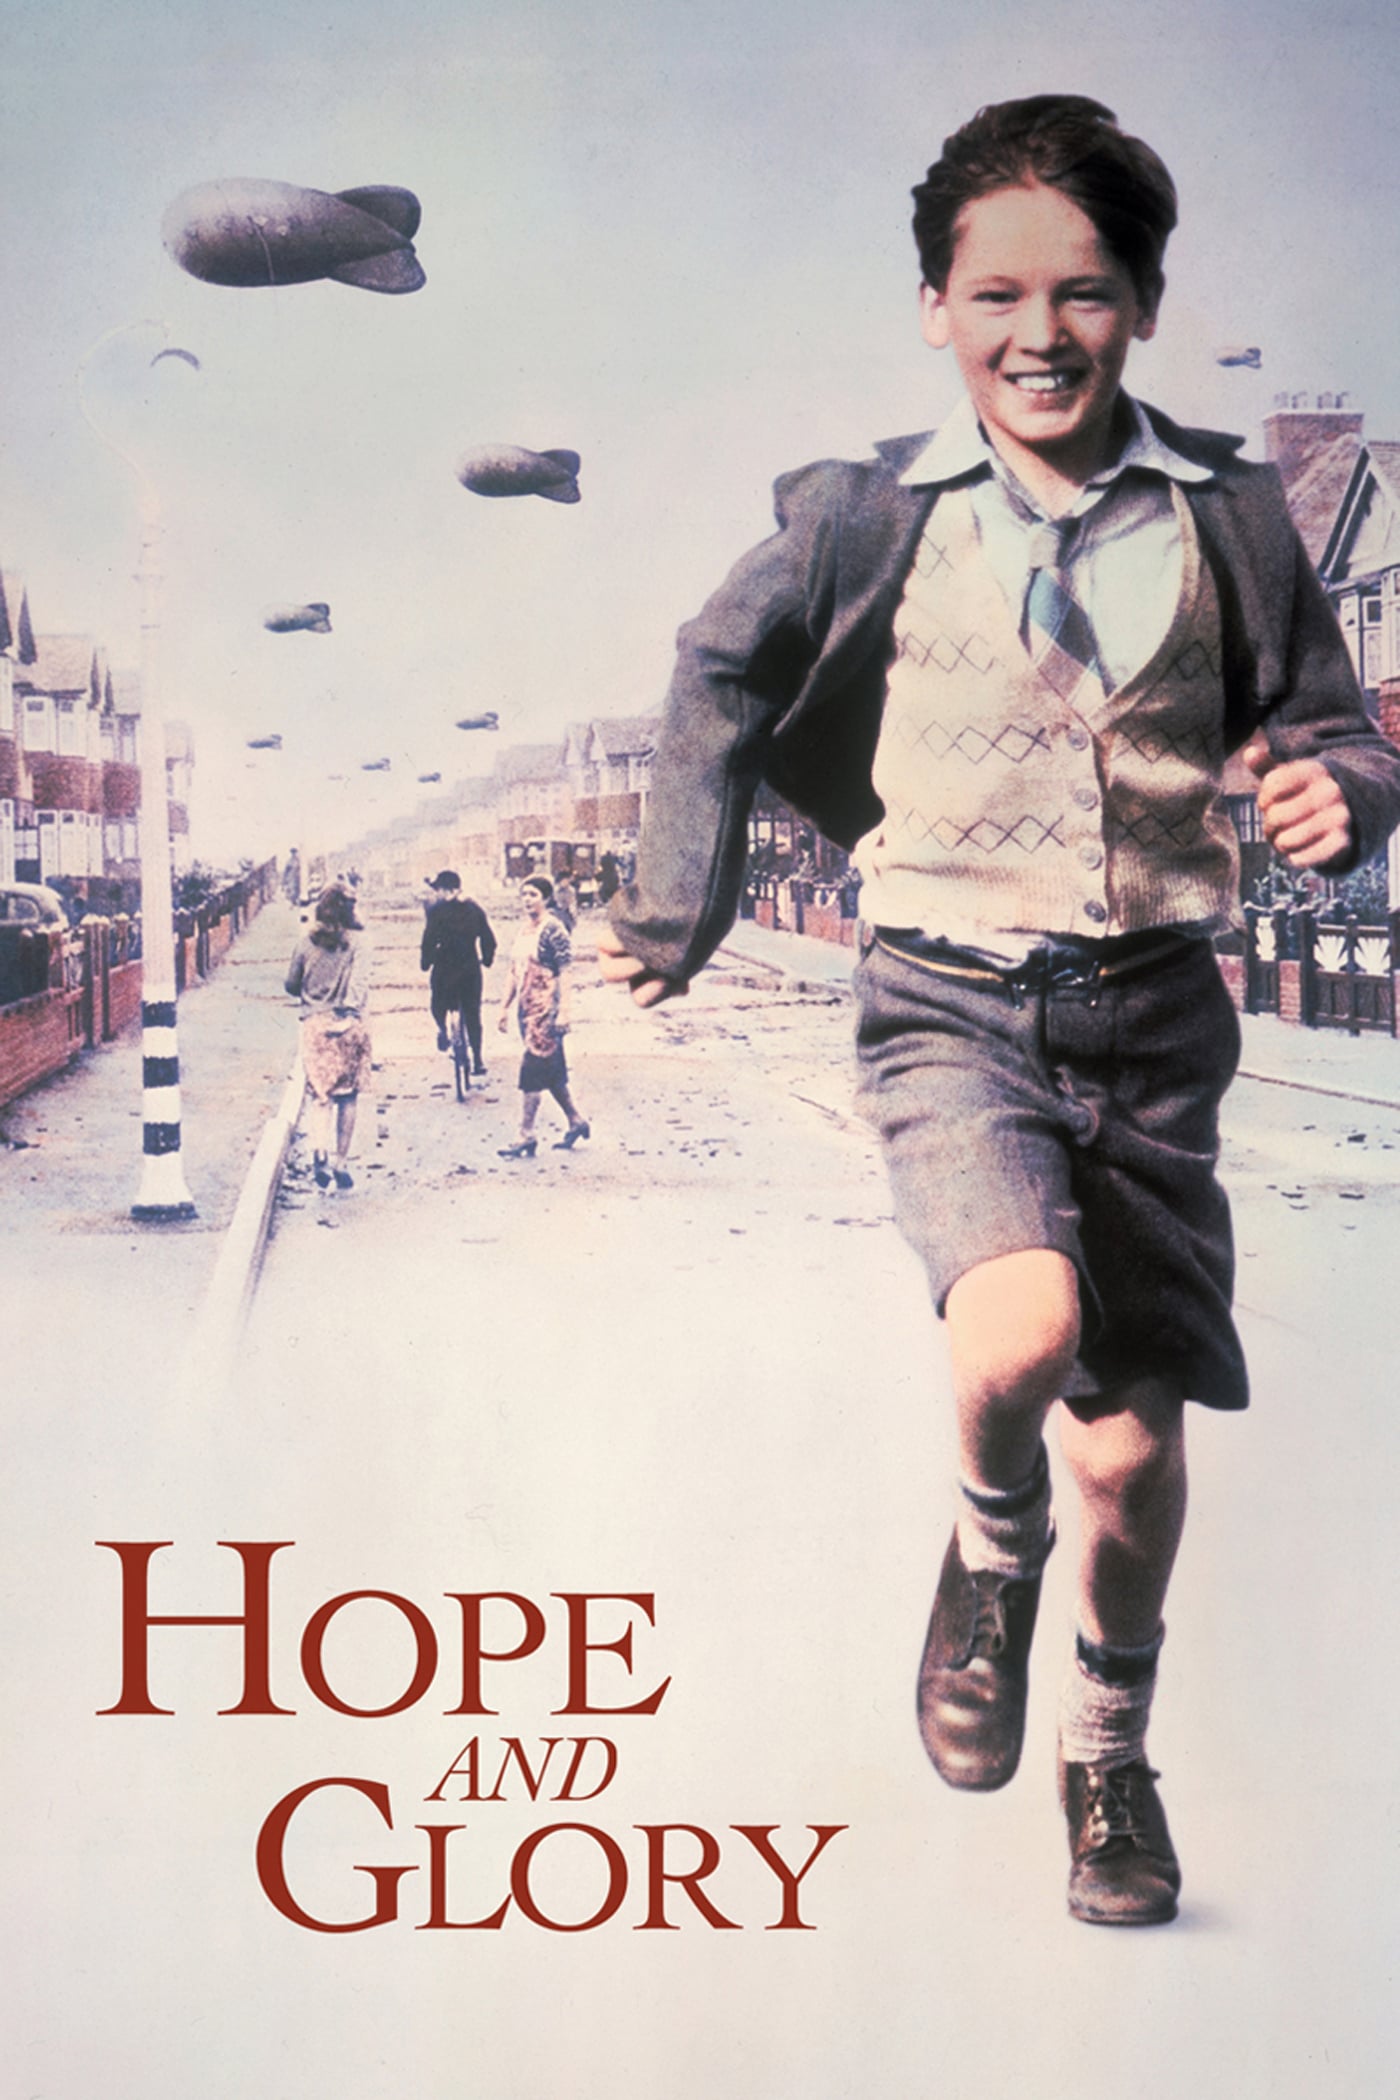 Poster for the movie "Hope and Glory"